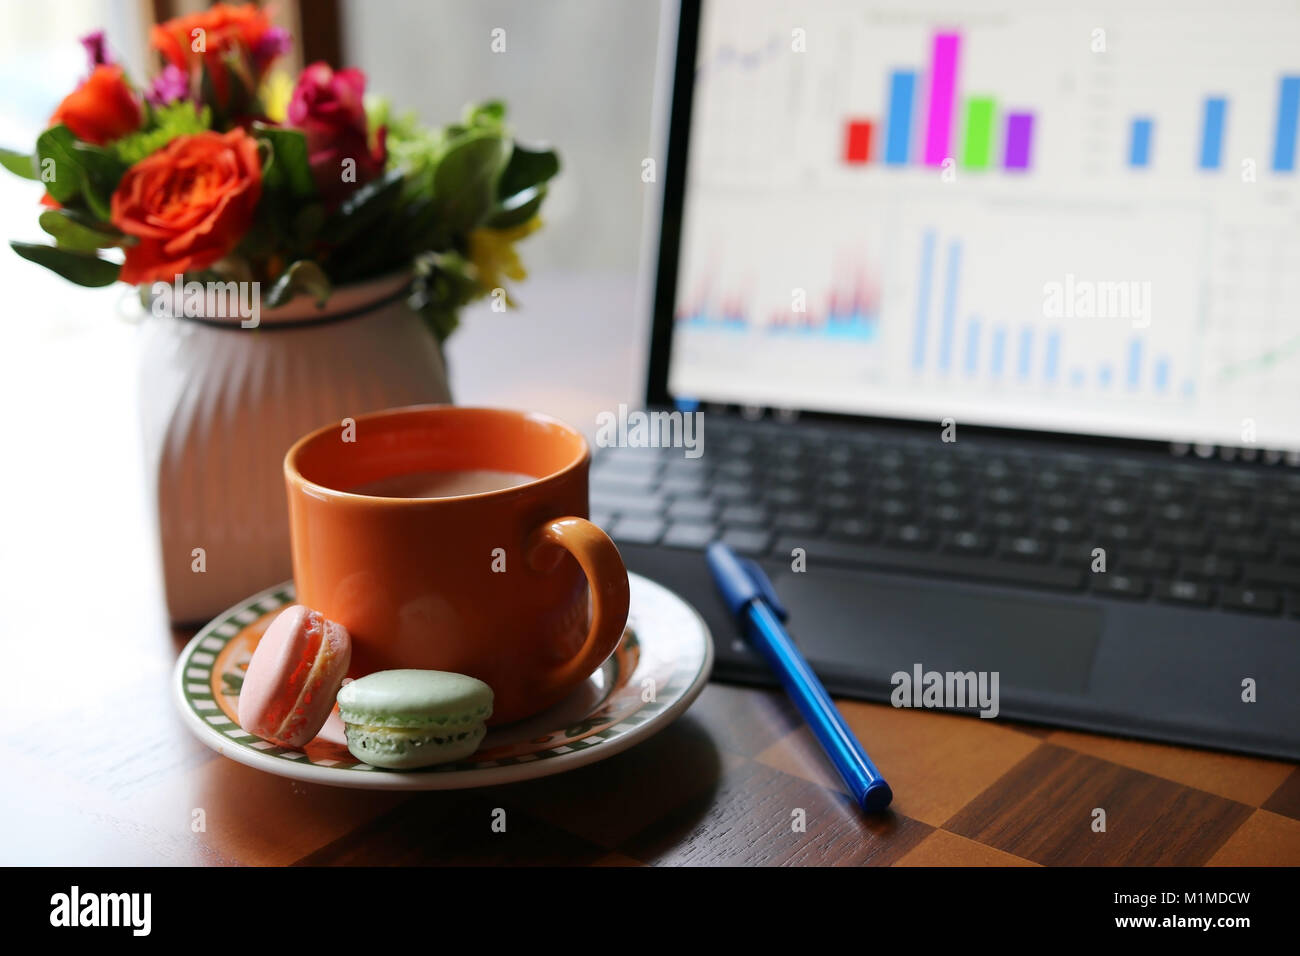 Cup of coffee with milk on the table on a foreground next to the working computer and vase with beautiful flowers bouquet on a shallow depth of field  Stock Photo